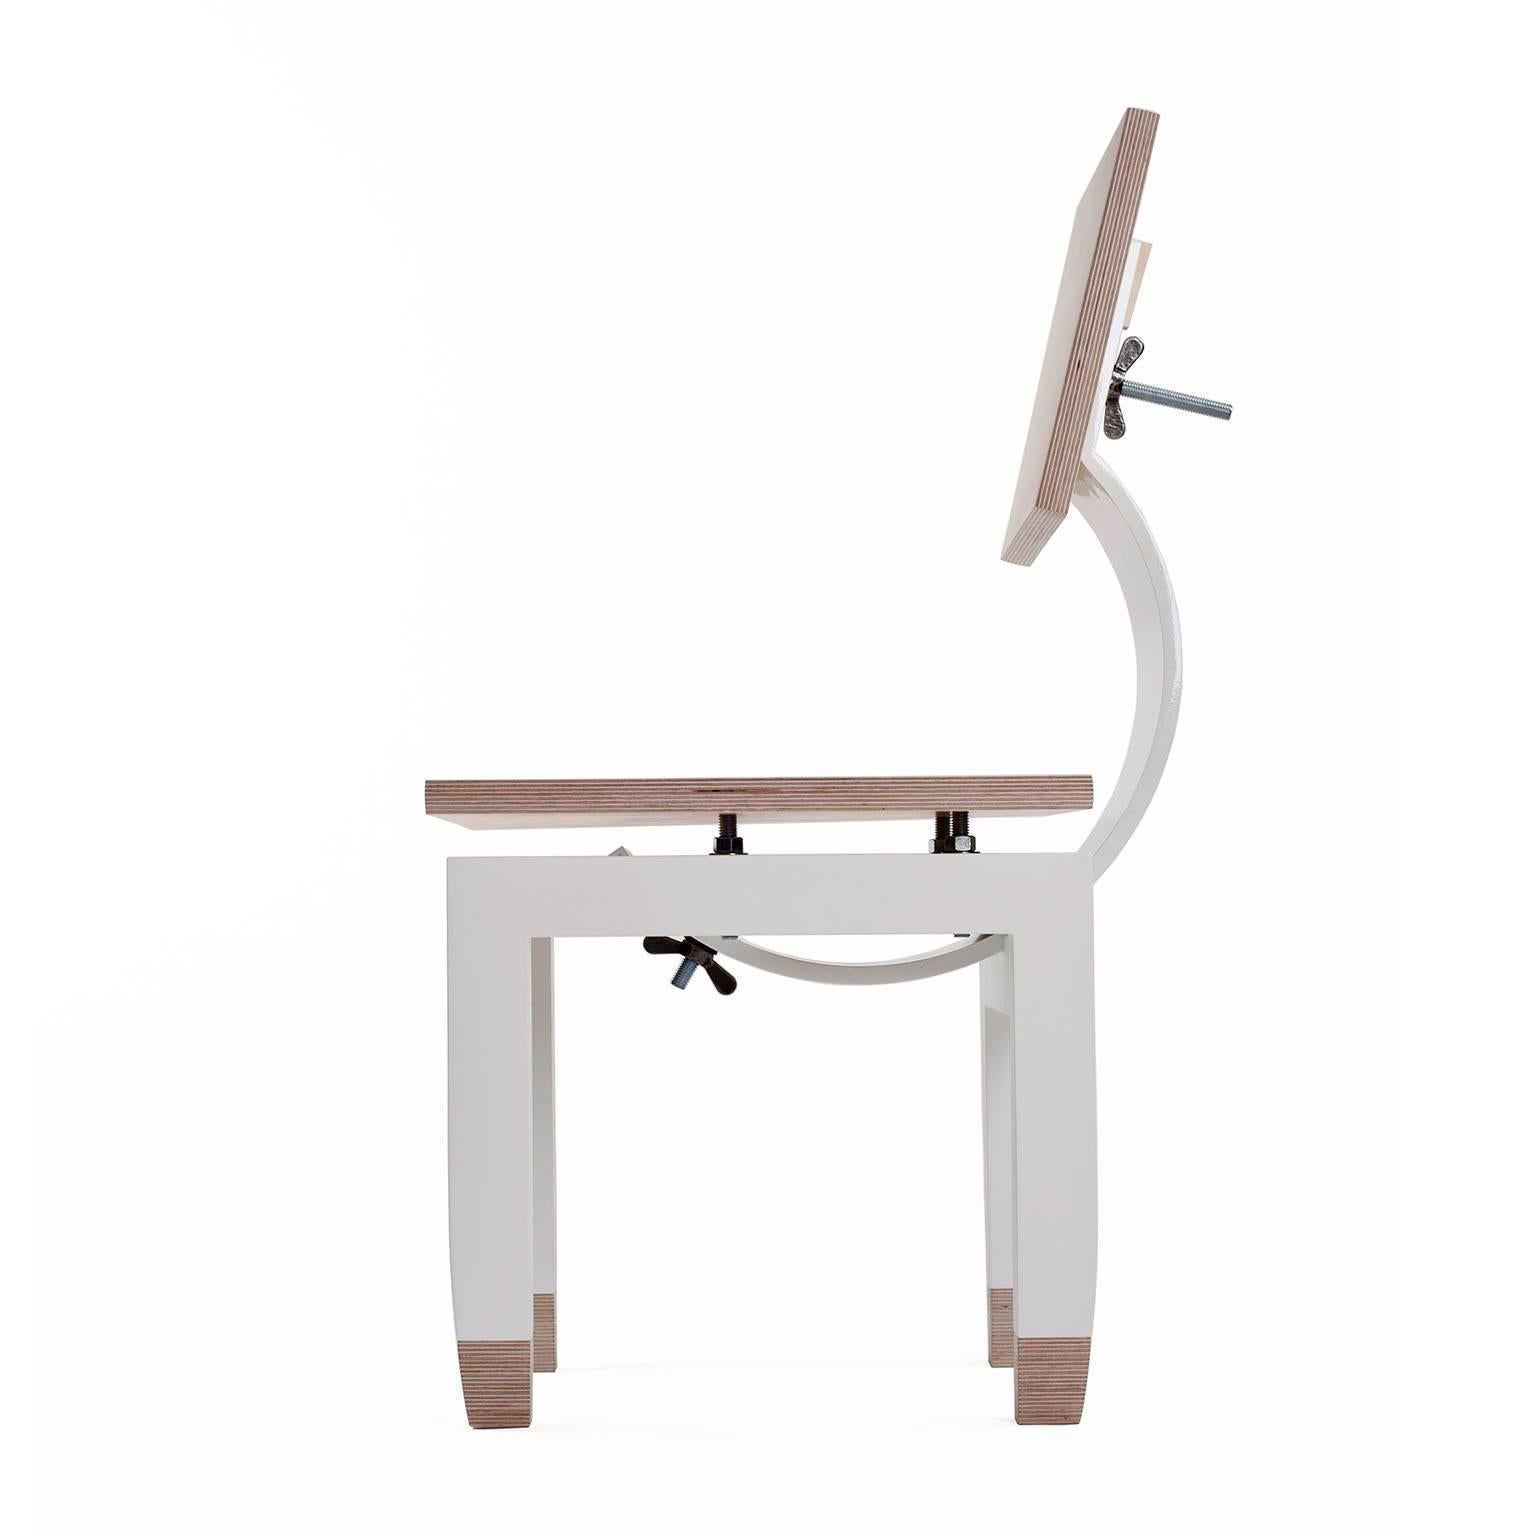 Chair[dot]multi-ply 2014.

In essence, a chair is a bench with a backrest.
Deceptively simple. 
Seated on a bench, your weight sends its' full force downwards. The successful bench needs to be only strong enough to support you. 
Add the